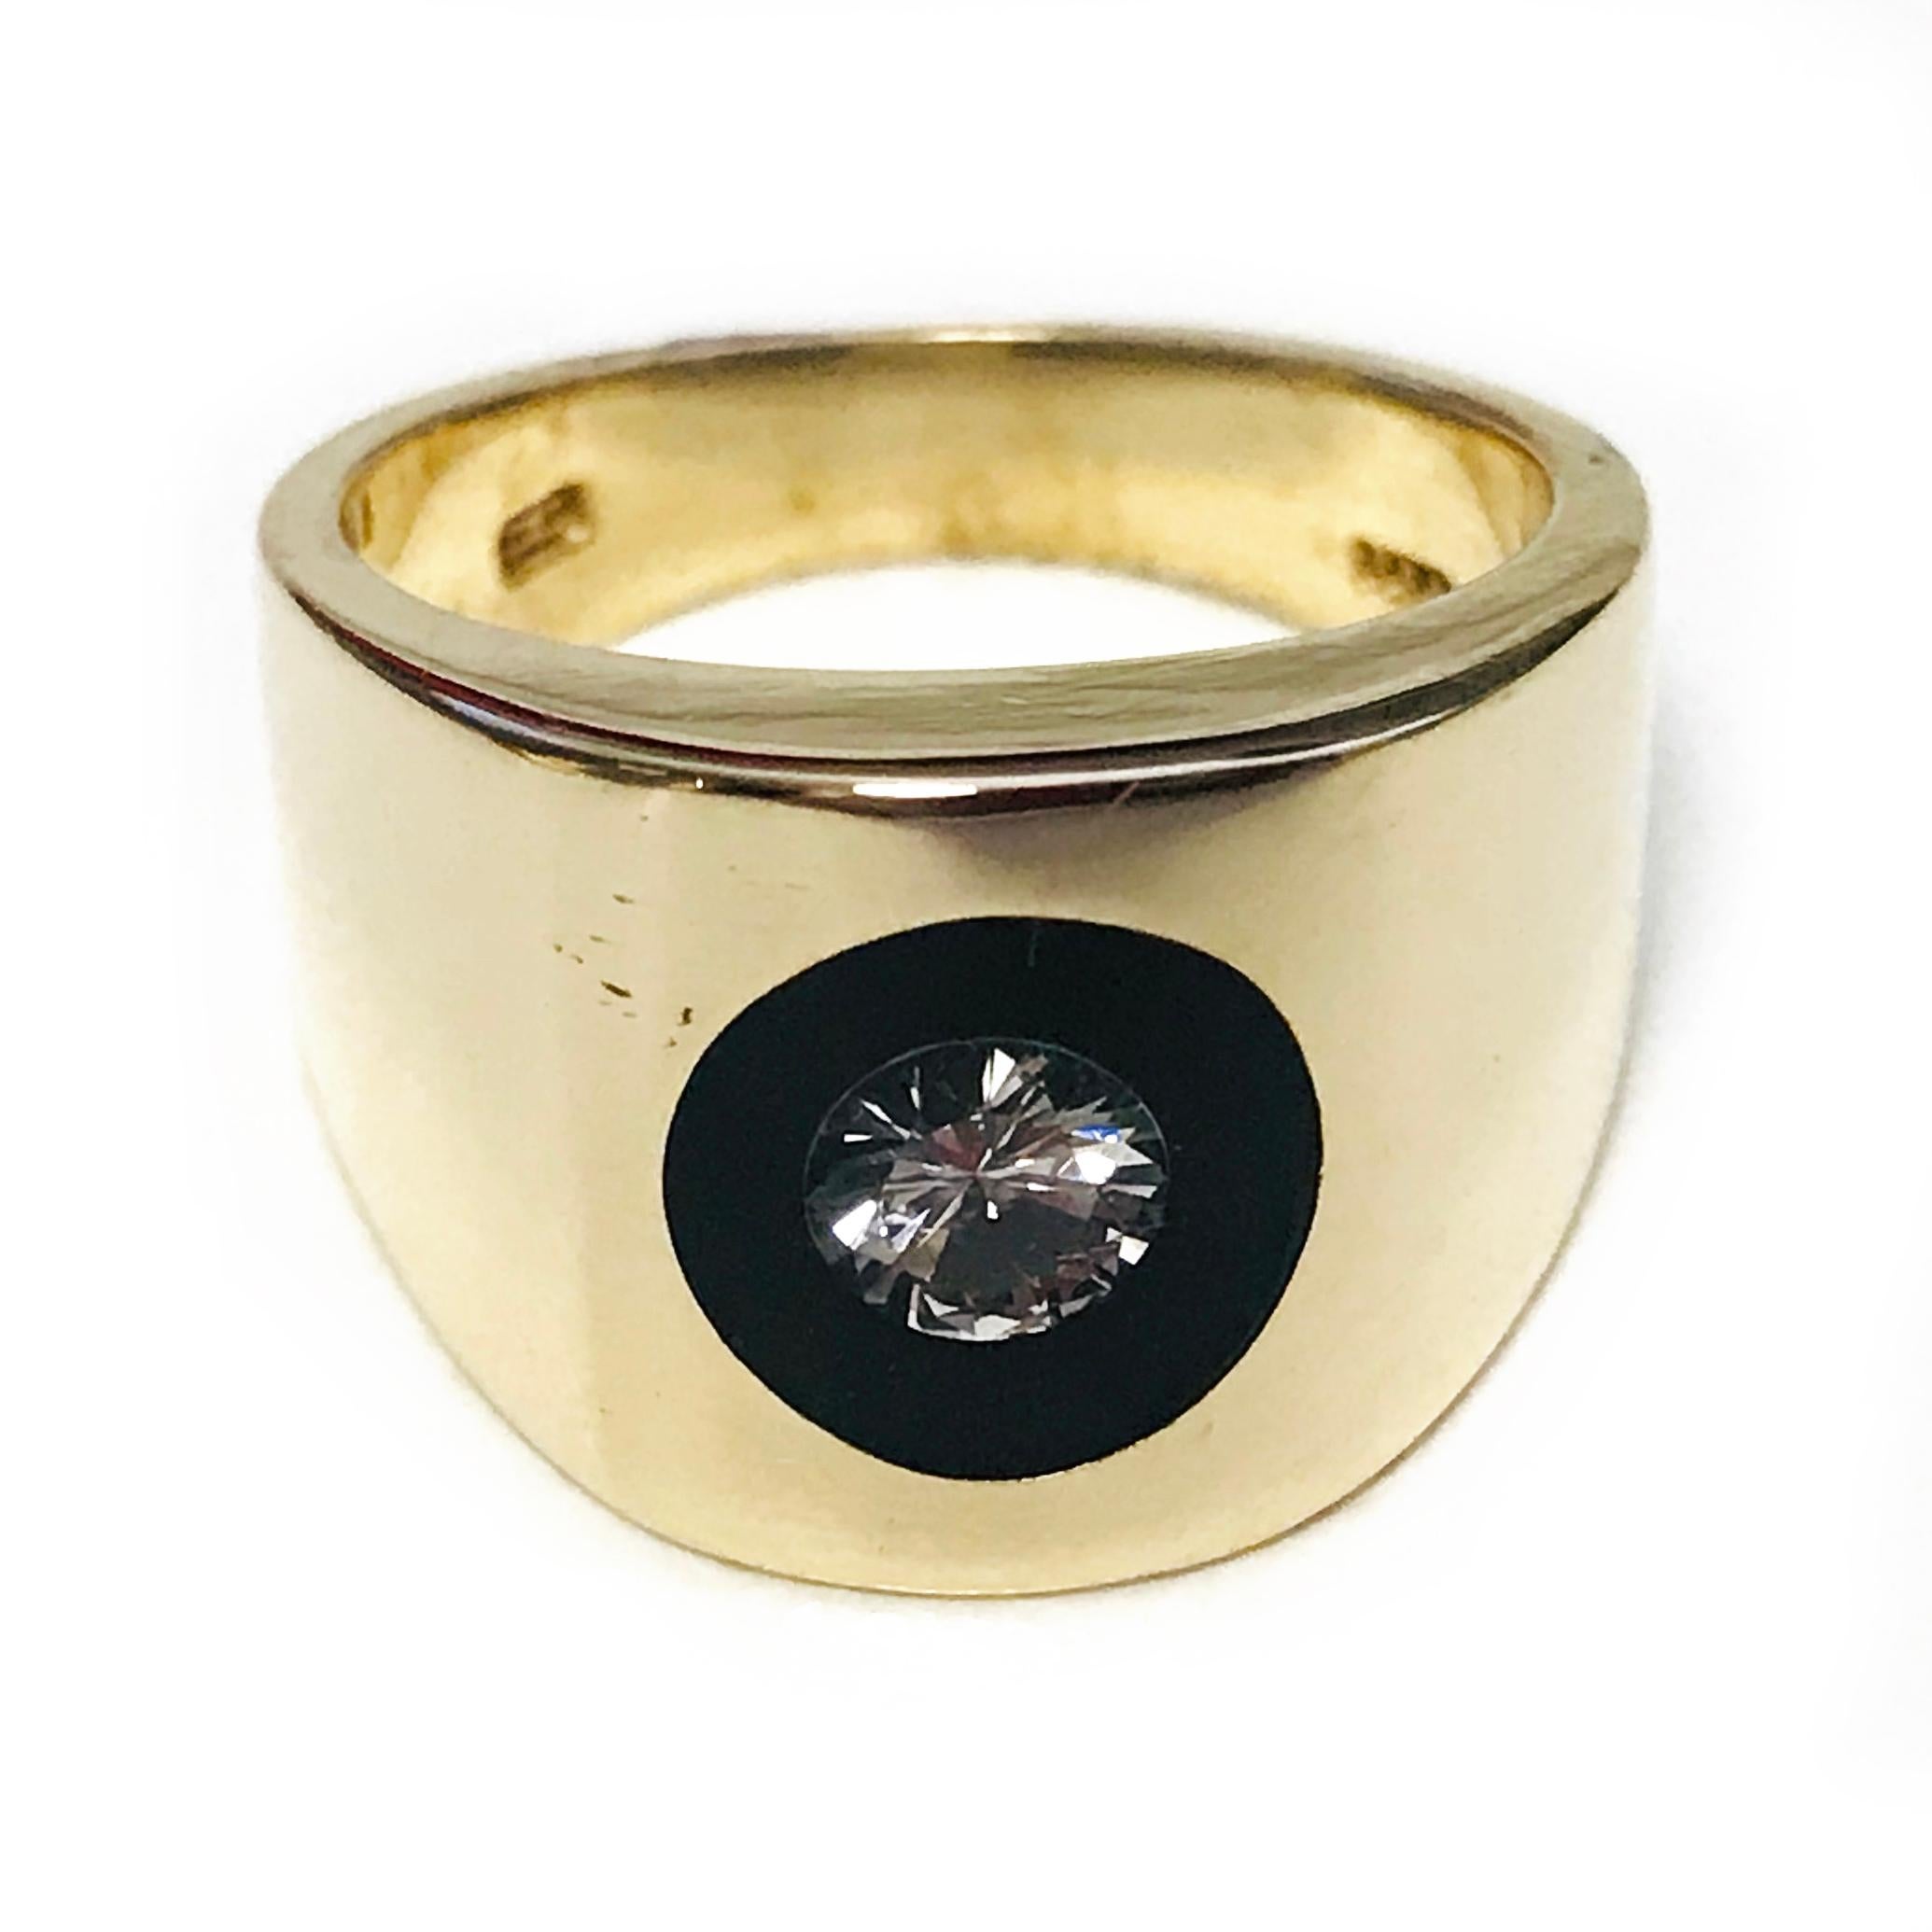 The Incogem Floating Diamond Lucite Ring. Handcrafted 14k Yellow Gold Ring, Floating Diamond in Lucite, 0.35ct round Brilliant-Cut, VS1 in clarity (G.I.A.) and G in color (G.I.A.). This ring size is 6.75. The ring measures approximately 23.1 x